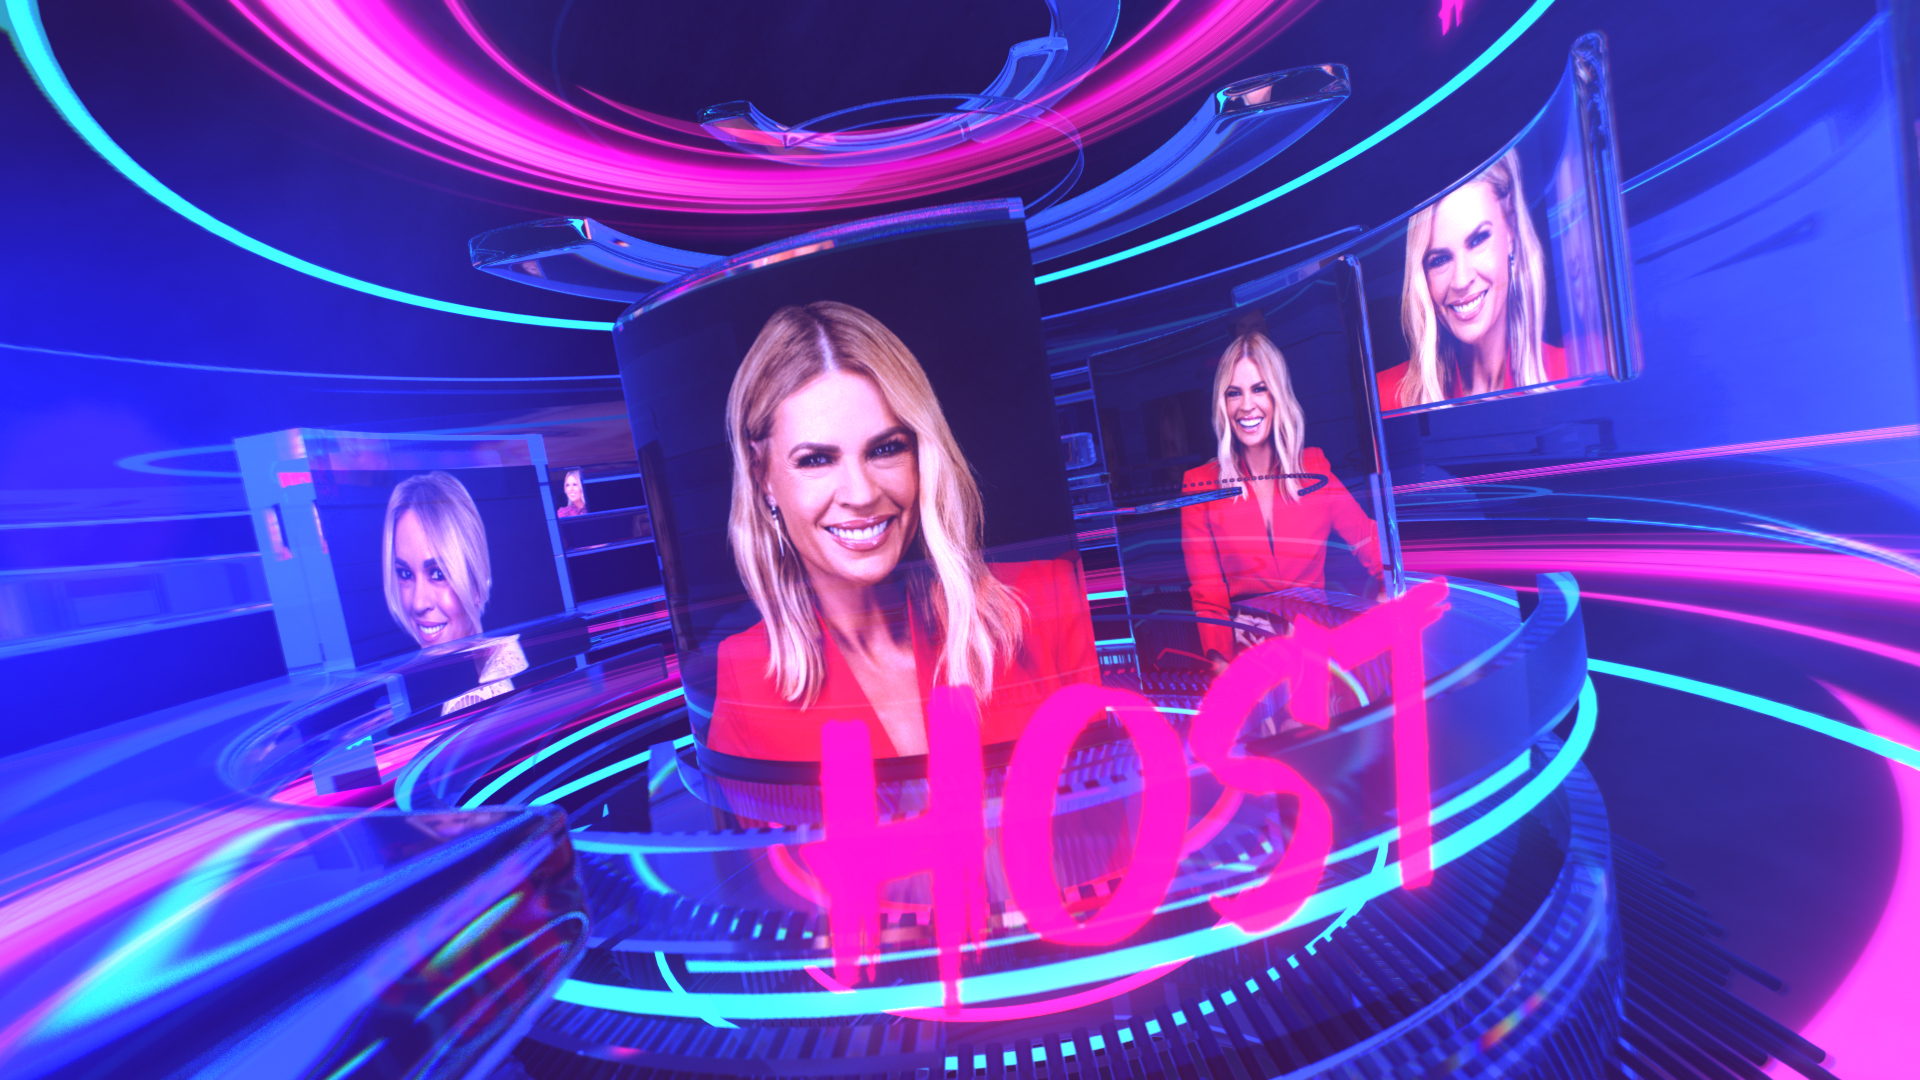 IT’S HAPPENING: Sonia Kruger To Return As Host Of The New ‘Big Brother’